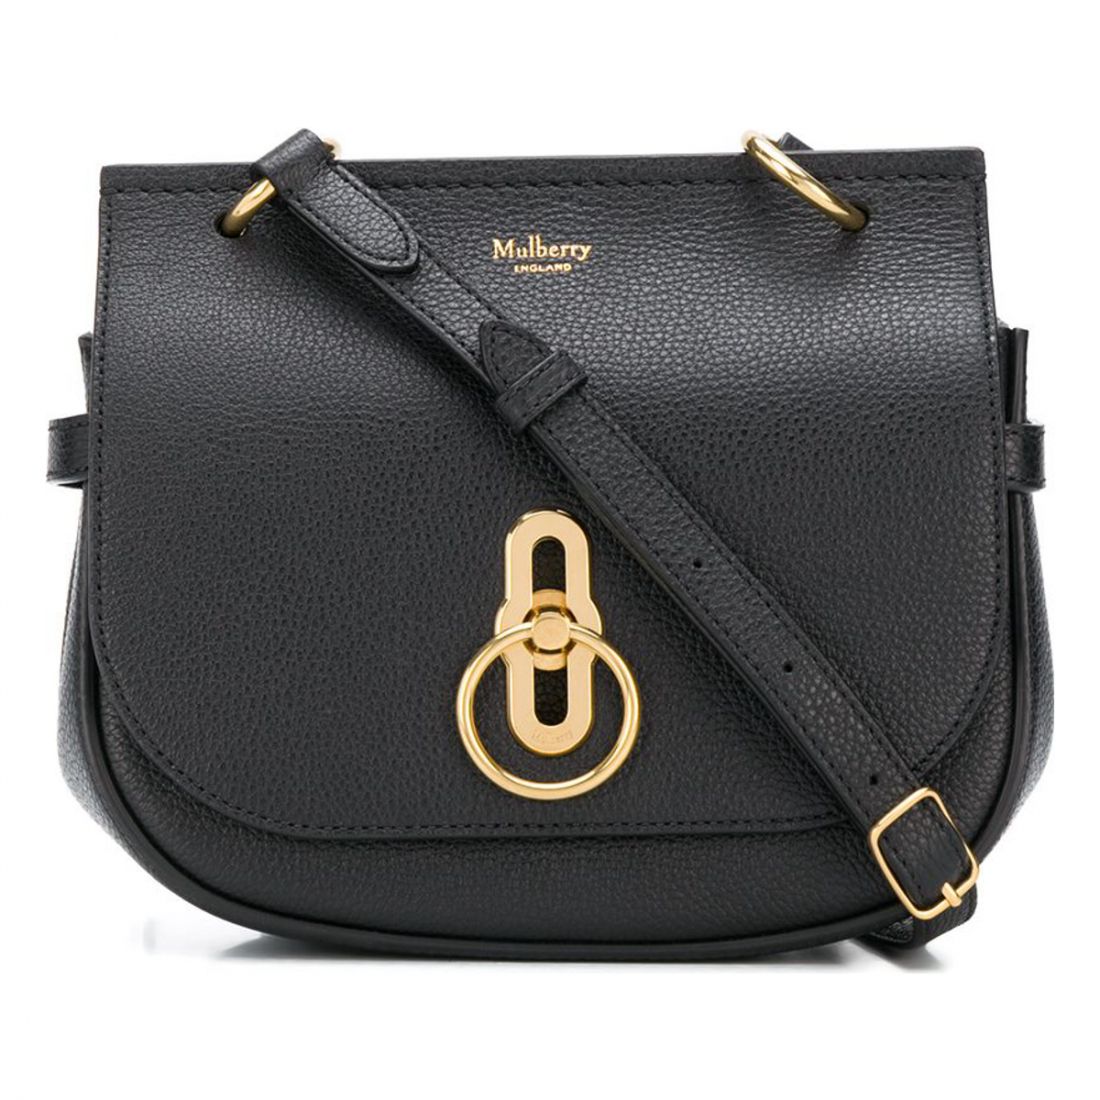 Mulberry - Sac 'Amberly' pour Femmes